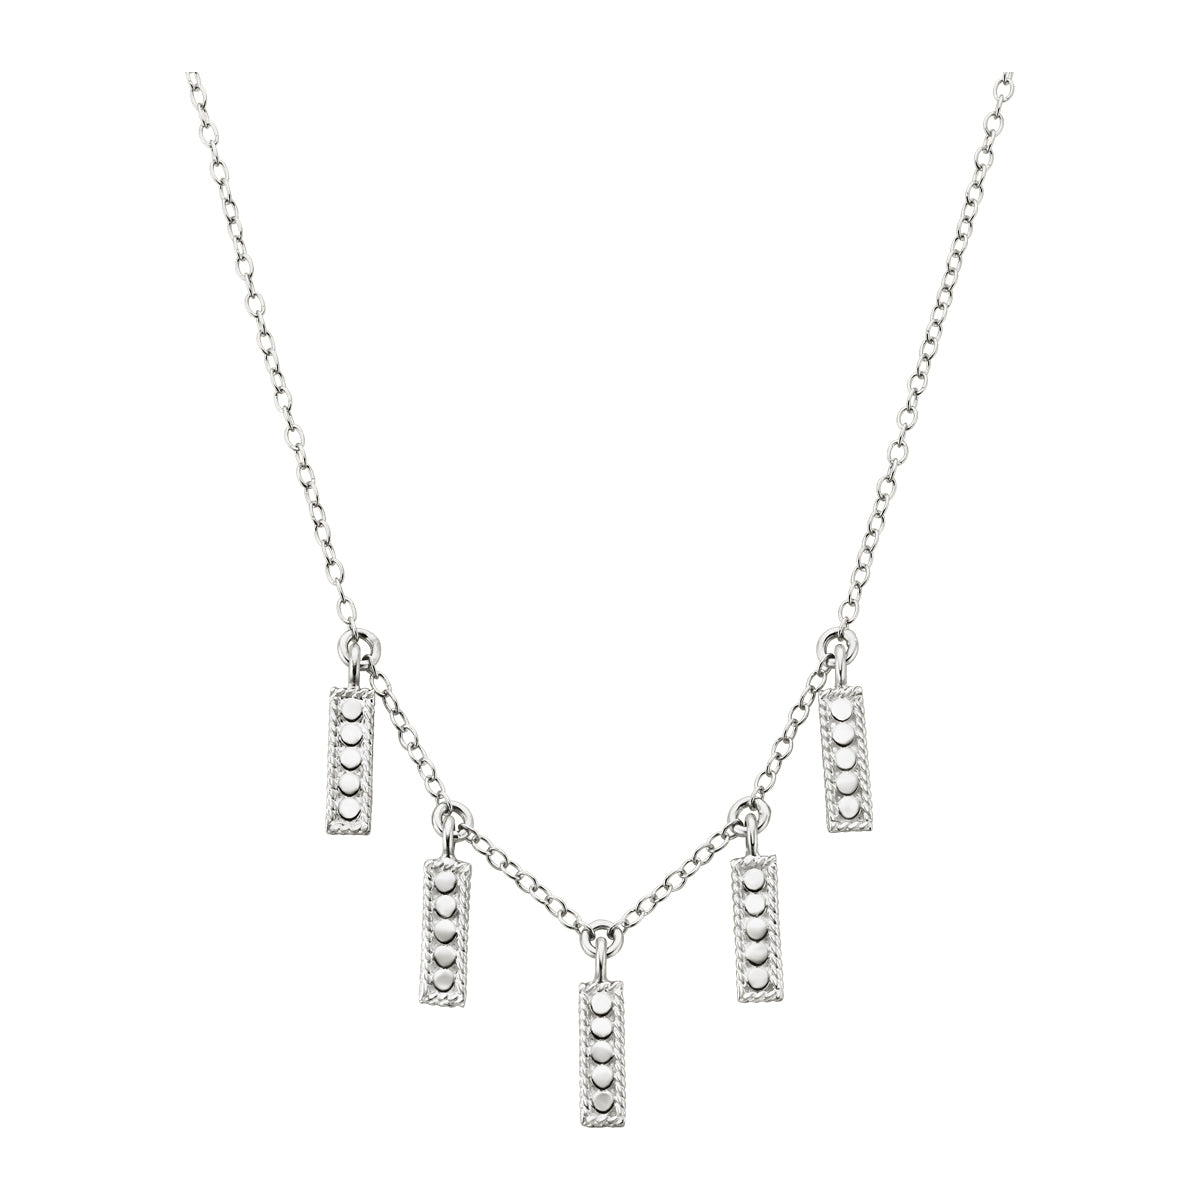 Ana Beck Sterling Silver Mini Bar Charm Necklace - Silver